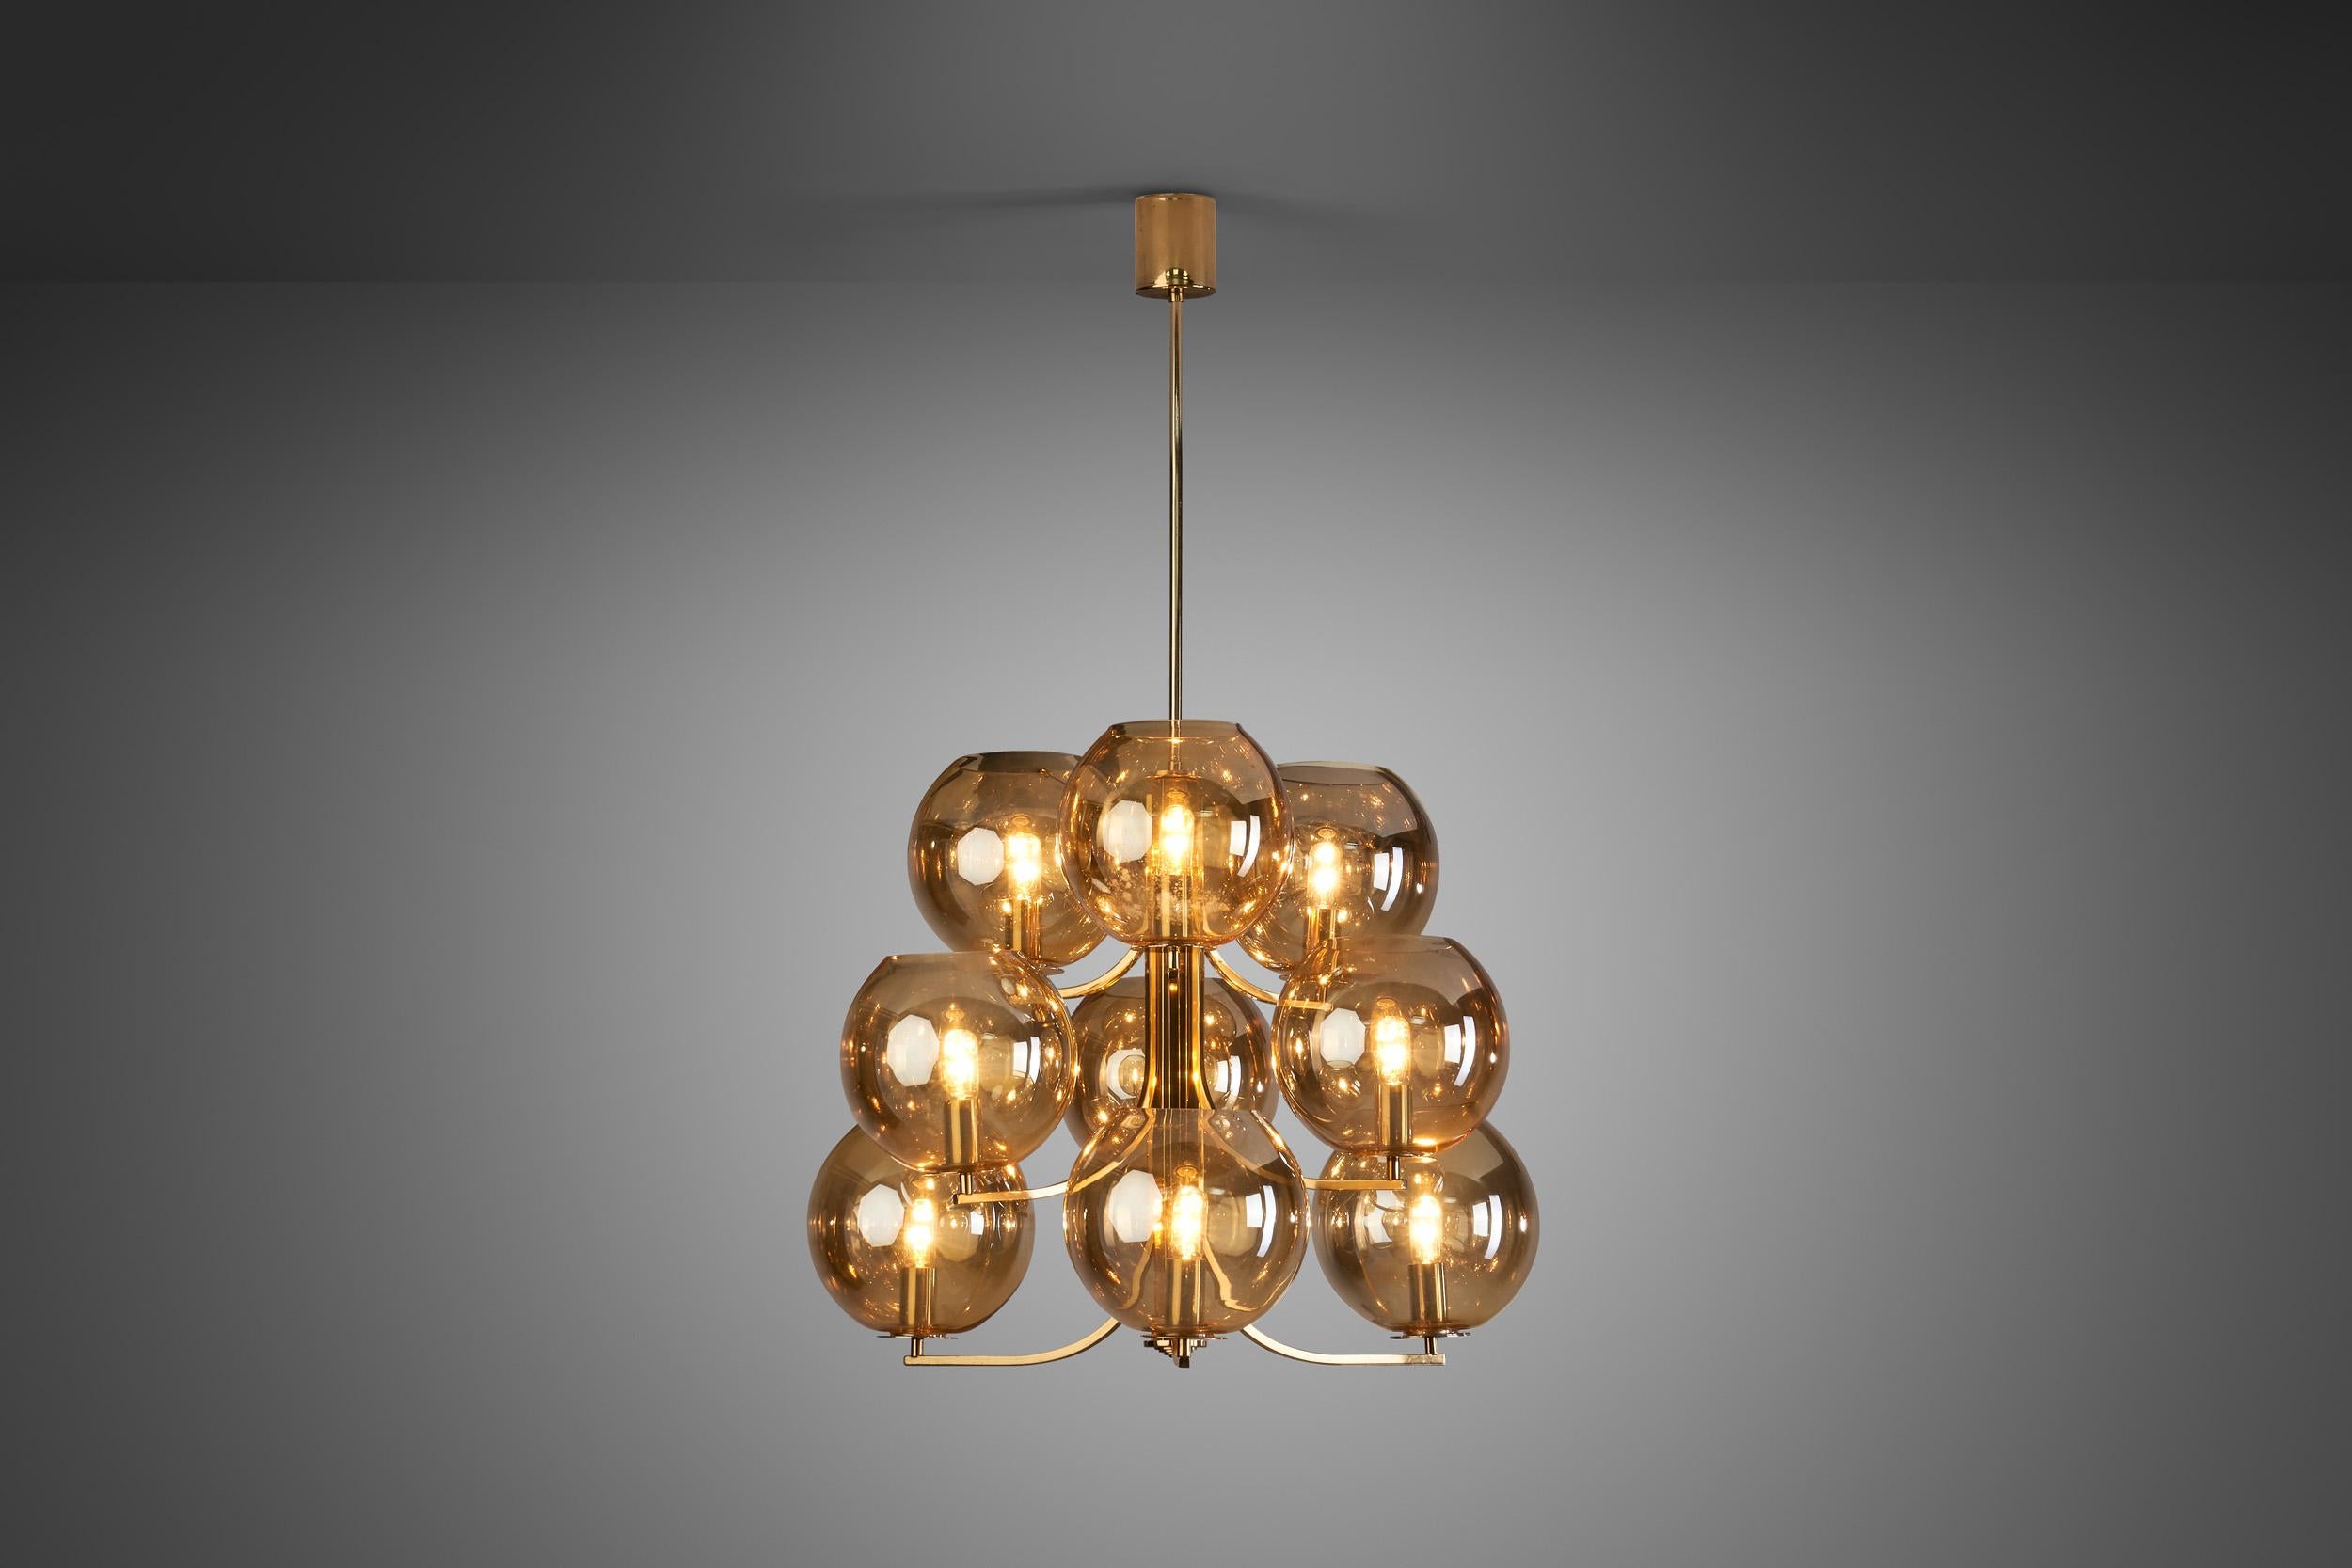 This rare, brass nine-armed chandelier was created in what we now call “the golden age of Scandinavian design”. Swedish designers were masters of lighting, designing some of the most recognizable mid-century modern lamps of Scandinavia.

With nine